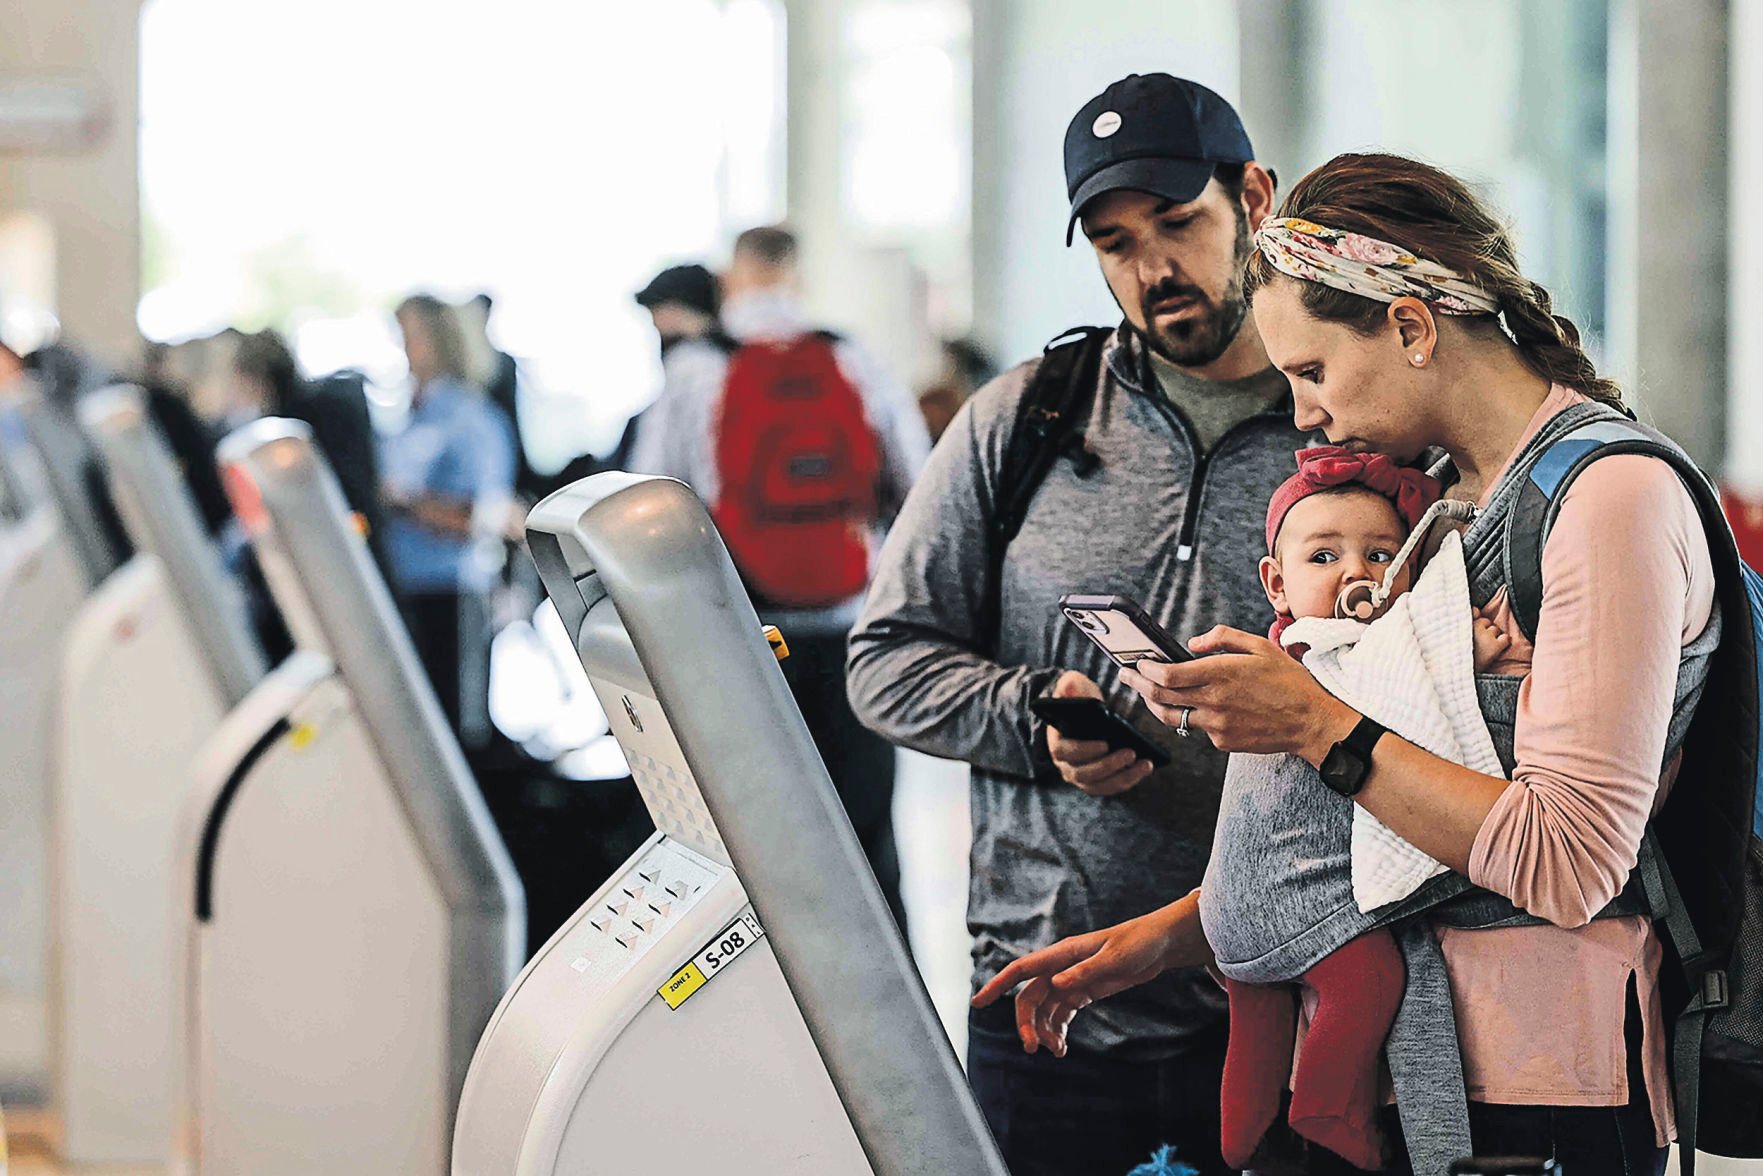 Zach and Cheryl Steifel, of Dallas, with their 4-month-old daughter Emery, check in for their flight to Nashville at Dallas Love Field Airport. Ticket costs are increasing, as more people are flying and carriers face high fuel costs.    PHOTO CREDIT: Tribune News Service